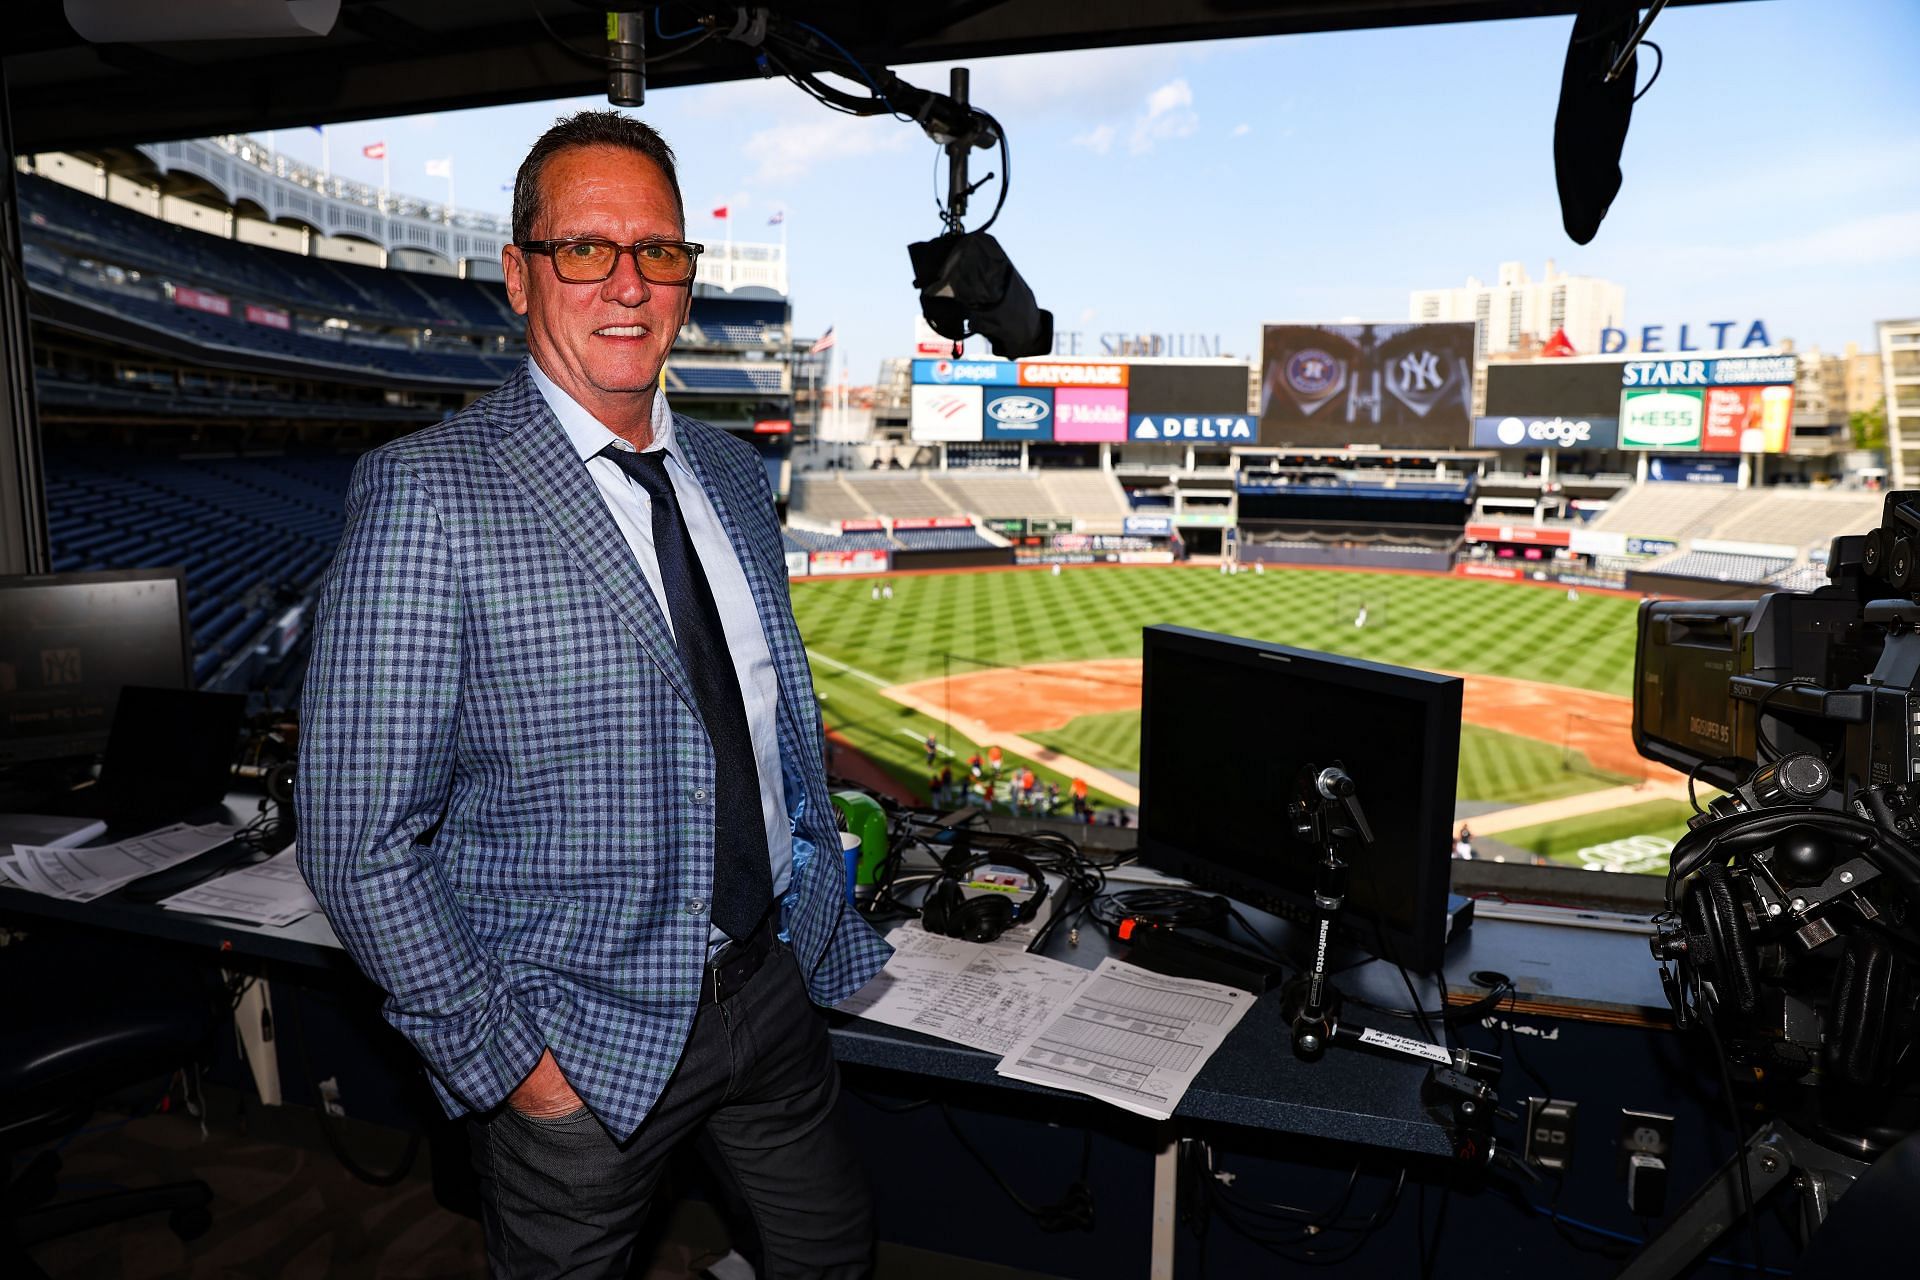 Yankees' David Cone says 'exotic' Red Sox pitcher had an impact on him 